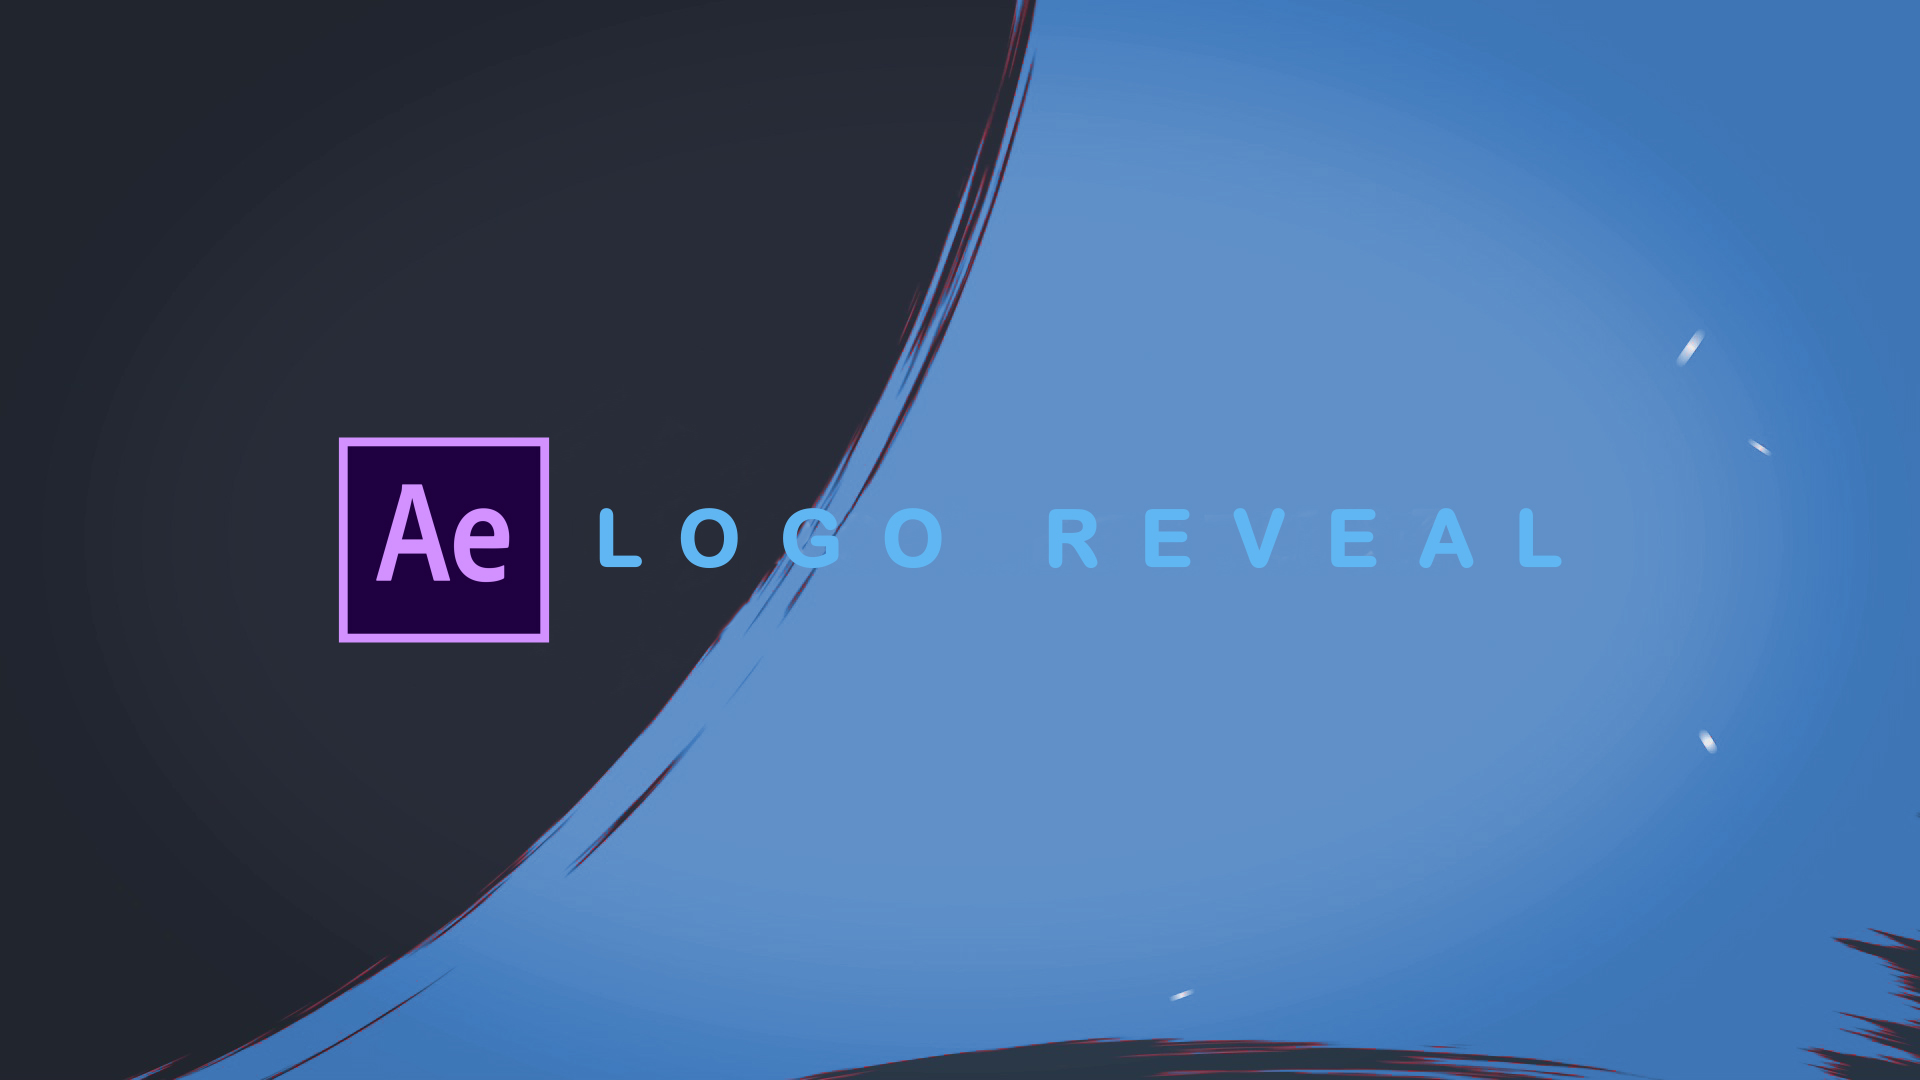 after-effects-logo-reveal-10-free-cliparts-download-images-on